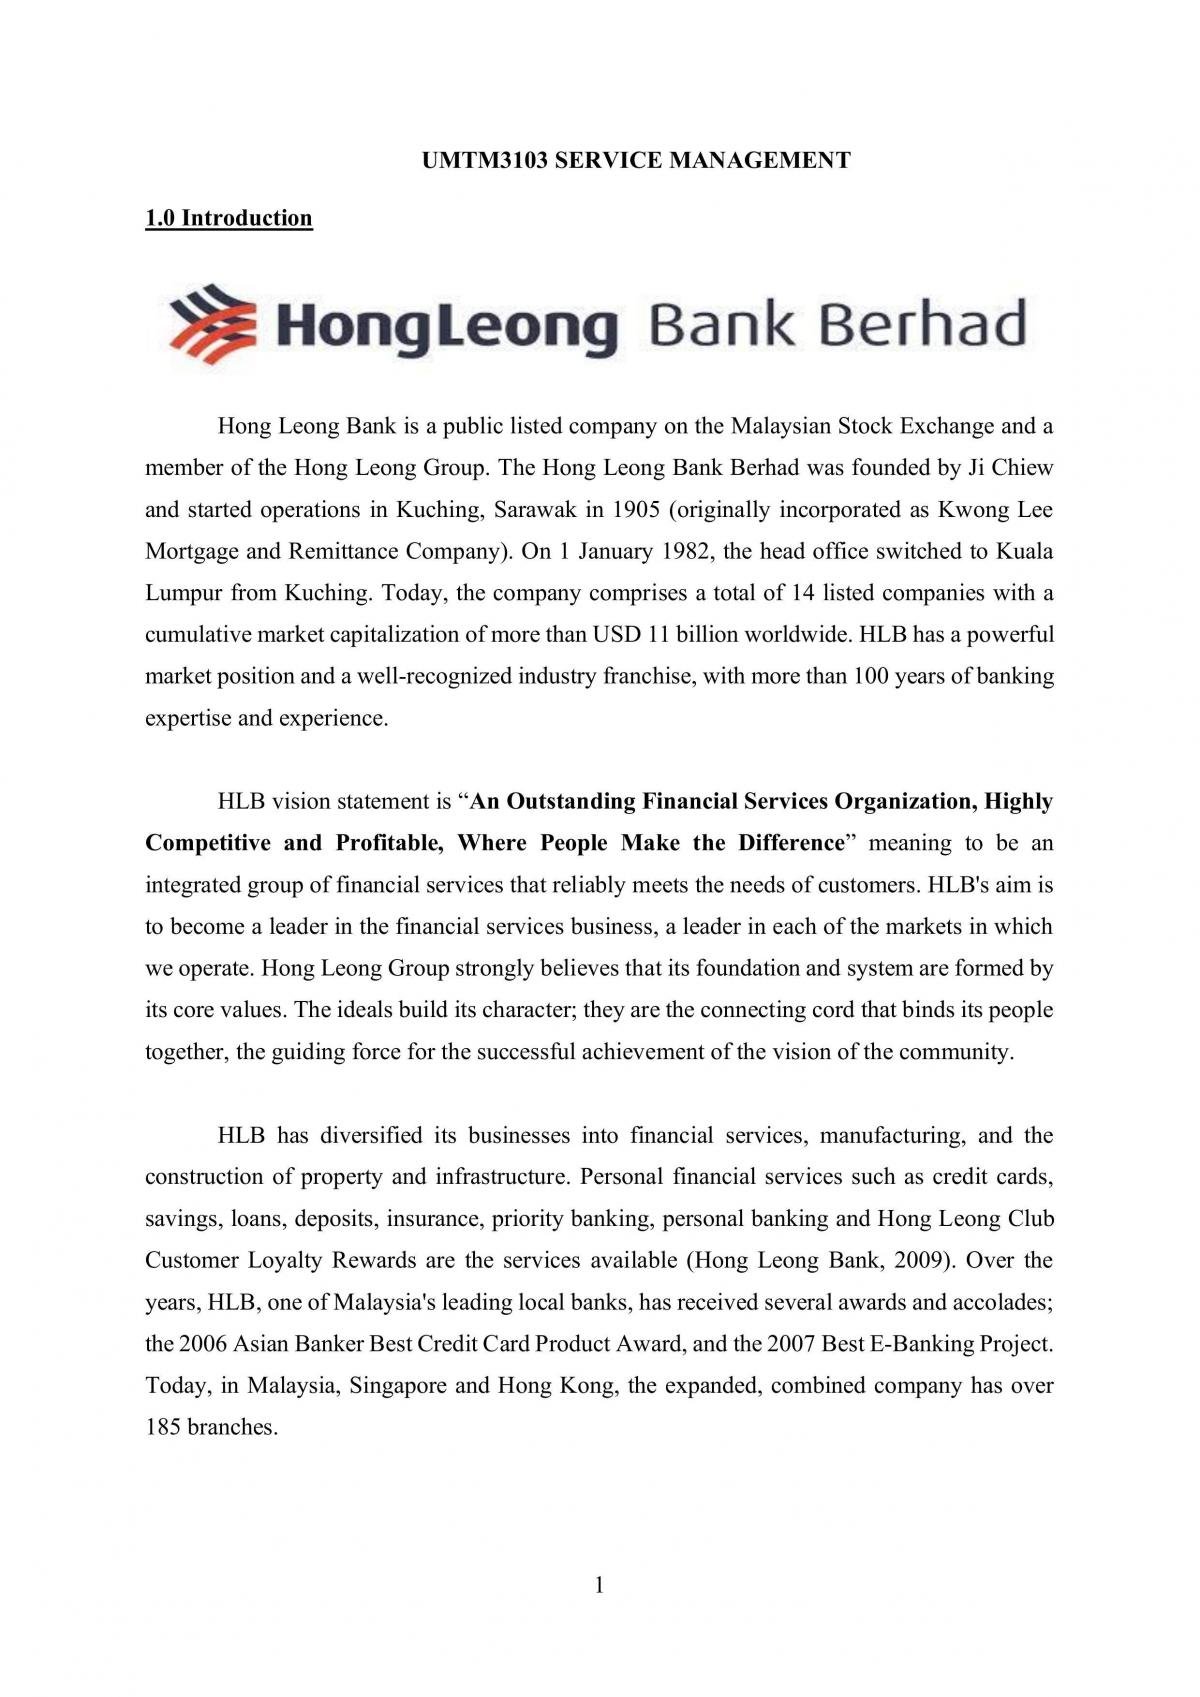 Research on Service Management by Hong Leong Bank Berhad  - Page 1